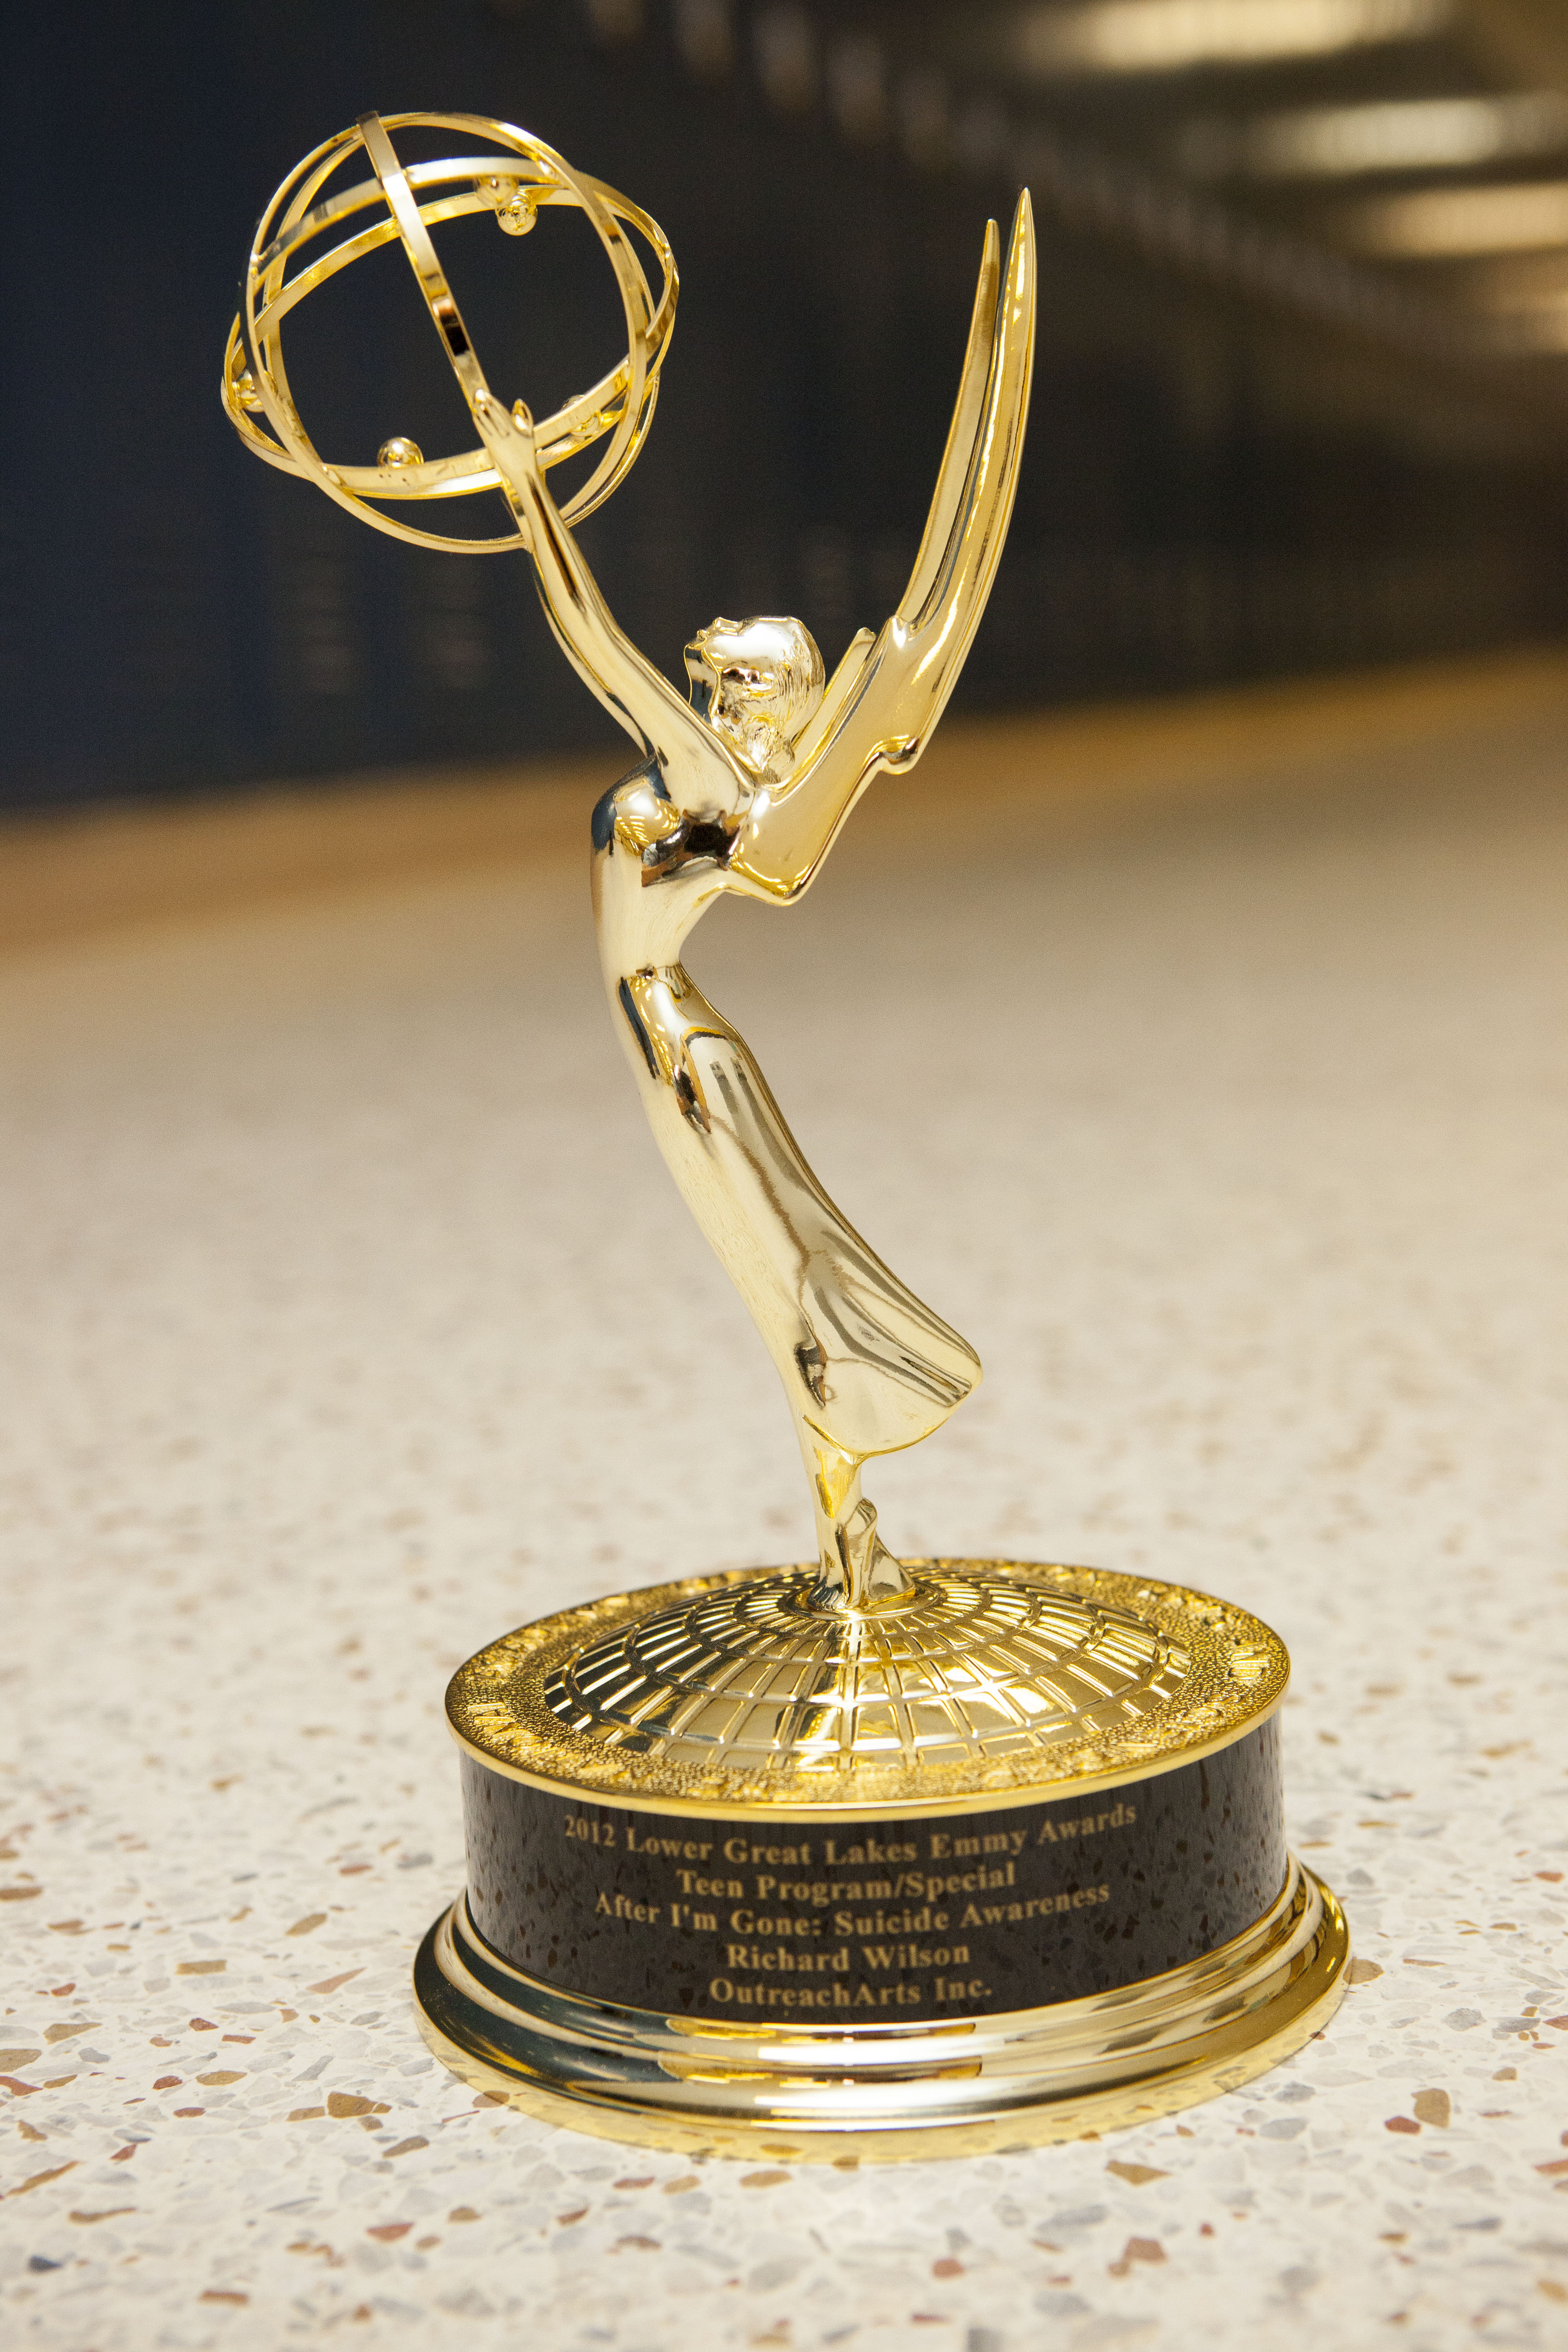 Richard Wilson's Emmy Award for his teen drama 'After I'm Gone'.